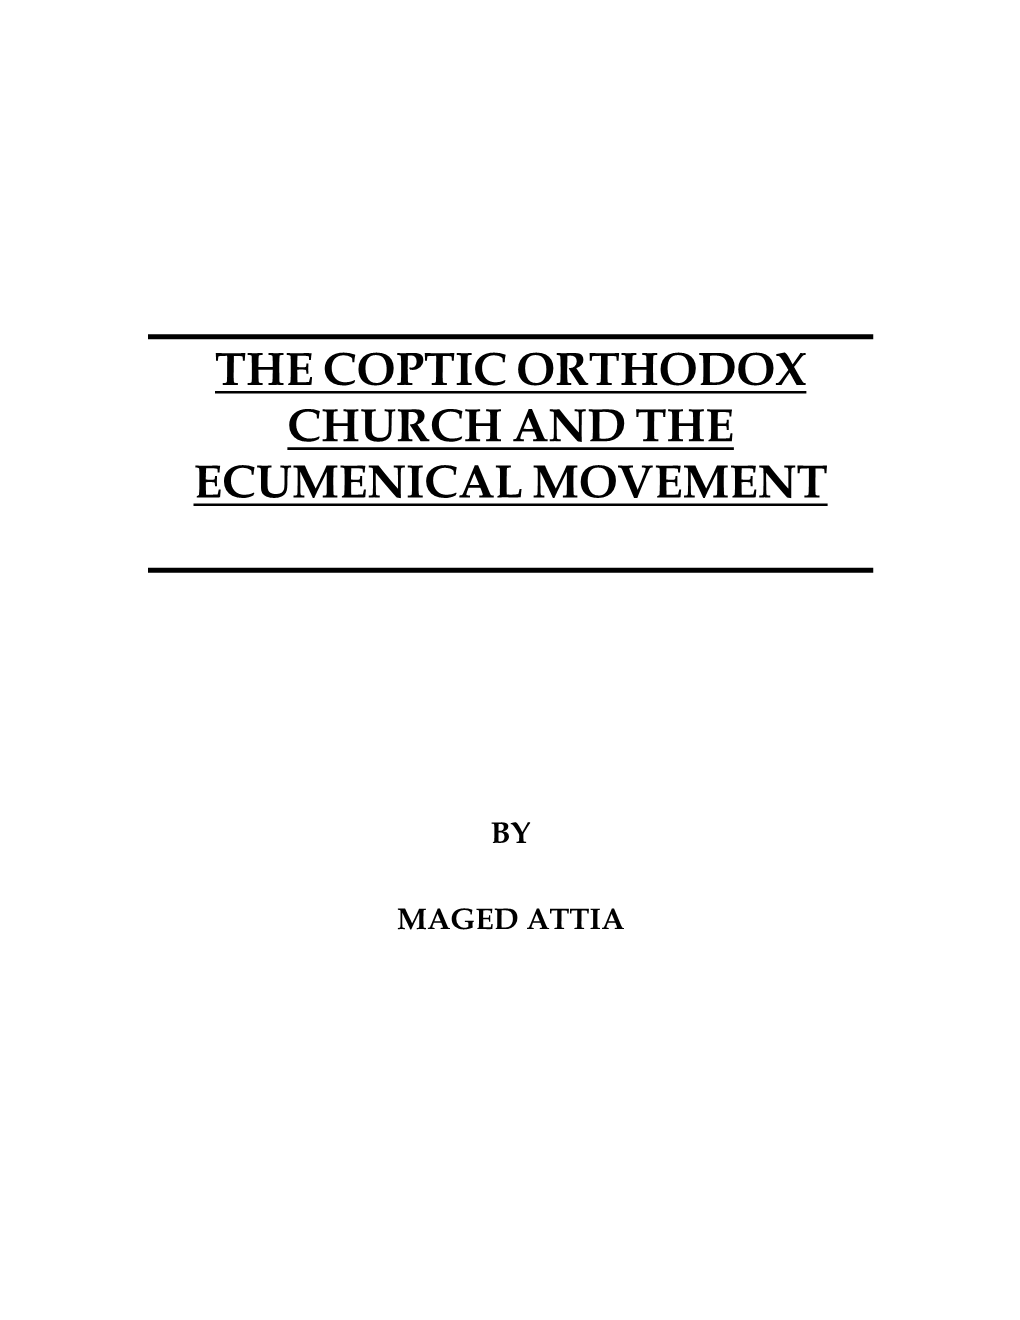 The Coptic Orthodox Church and the Ecumenical Movement